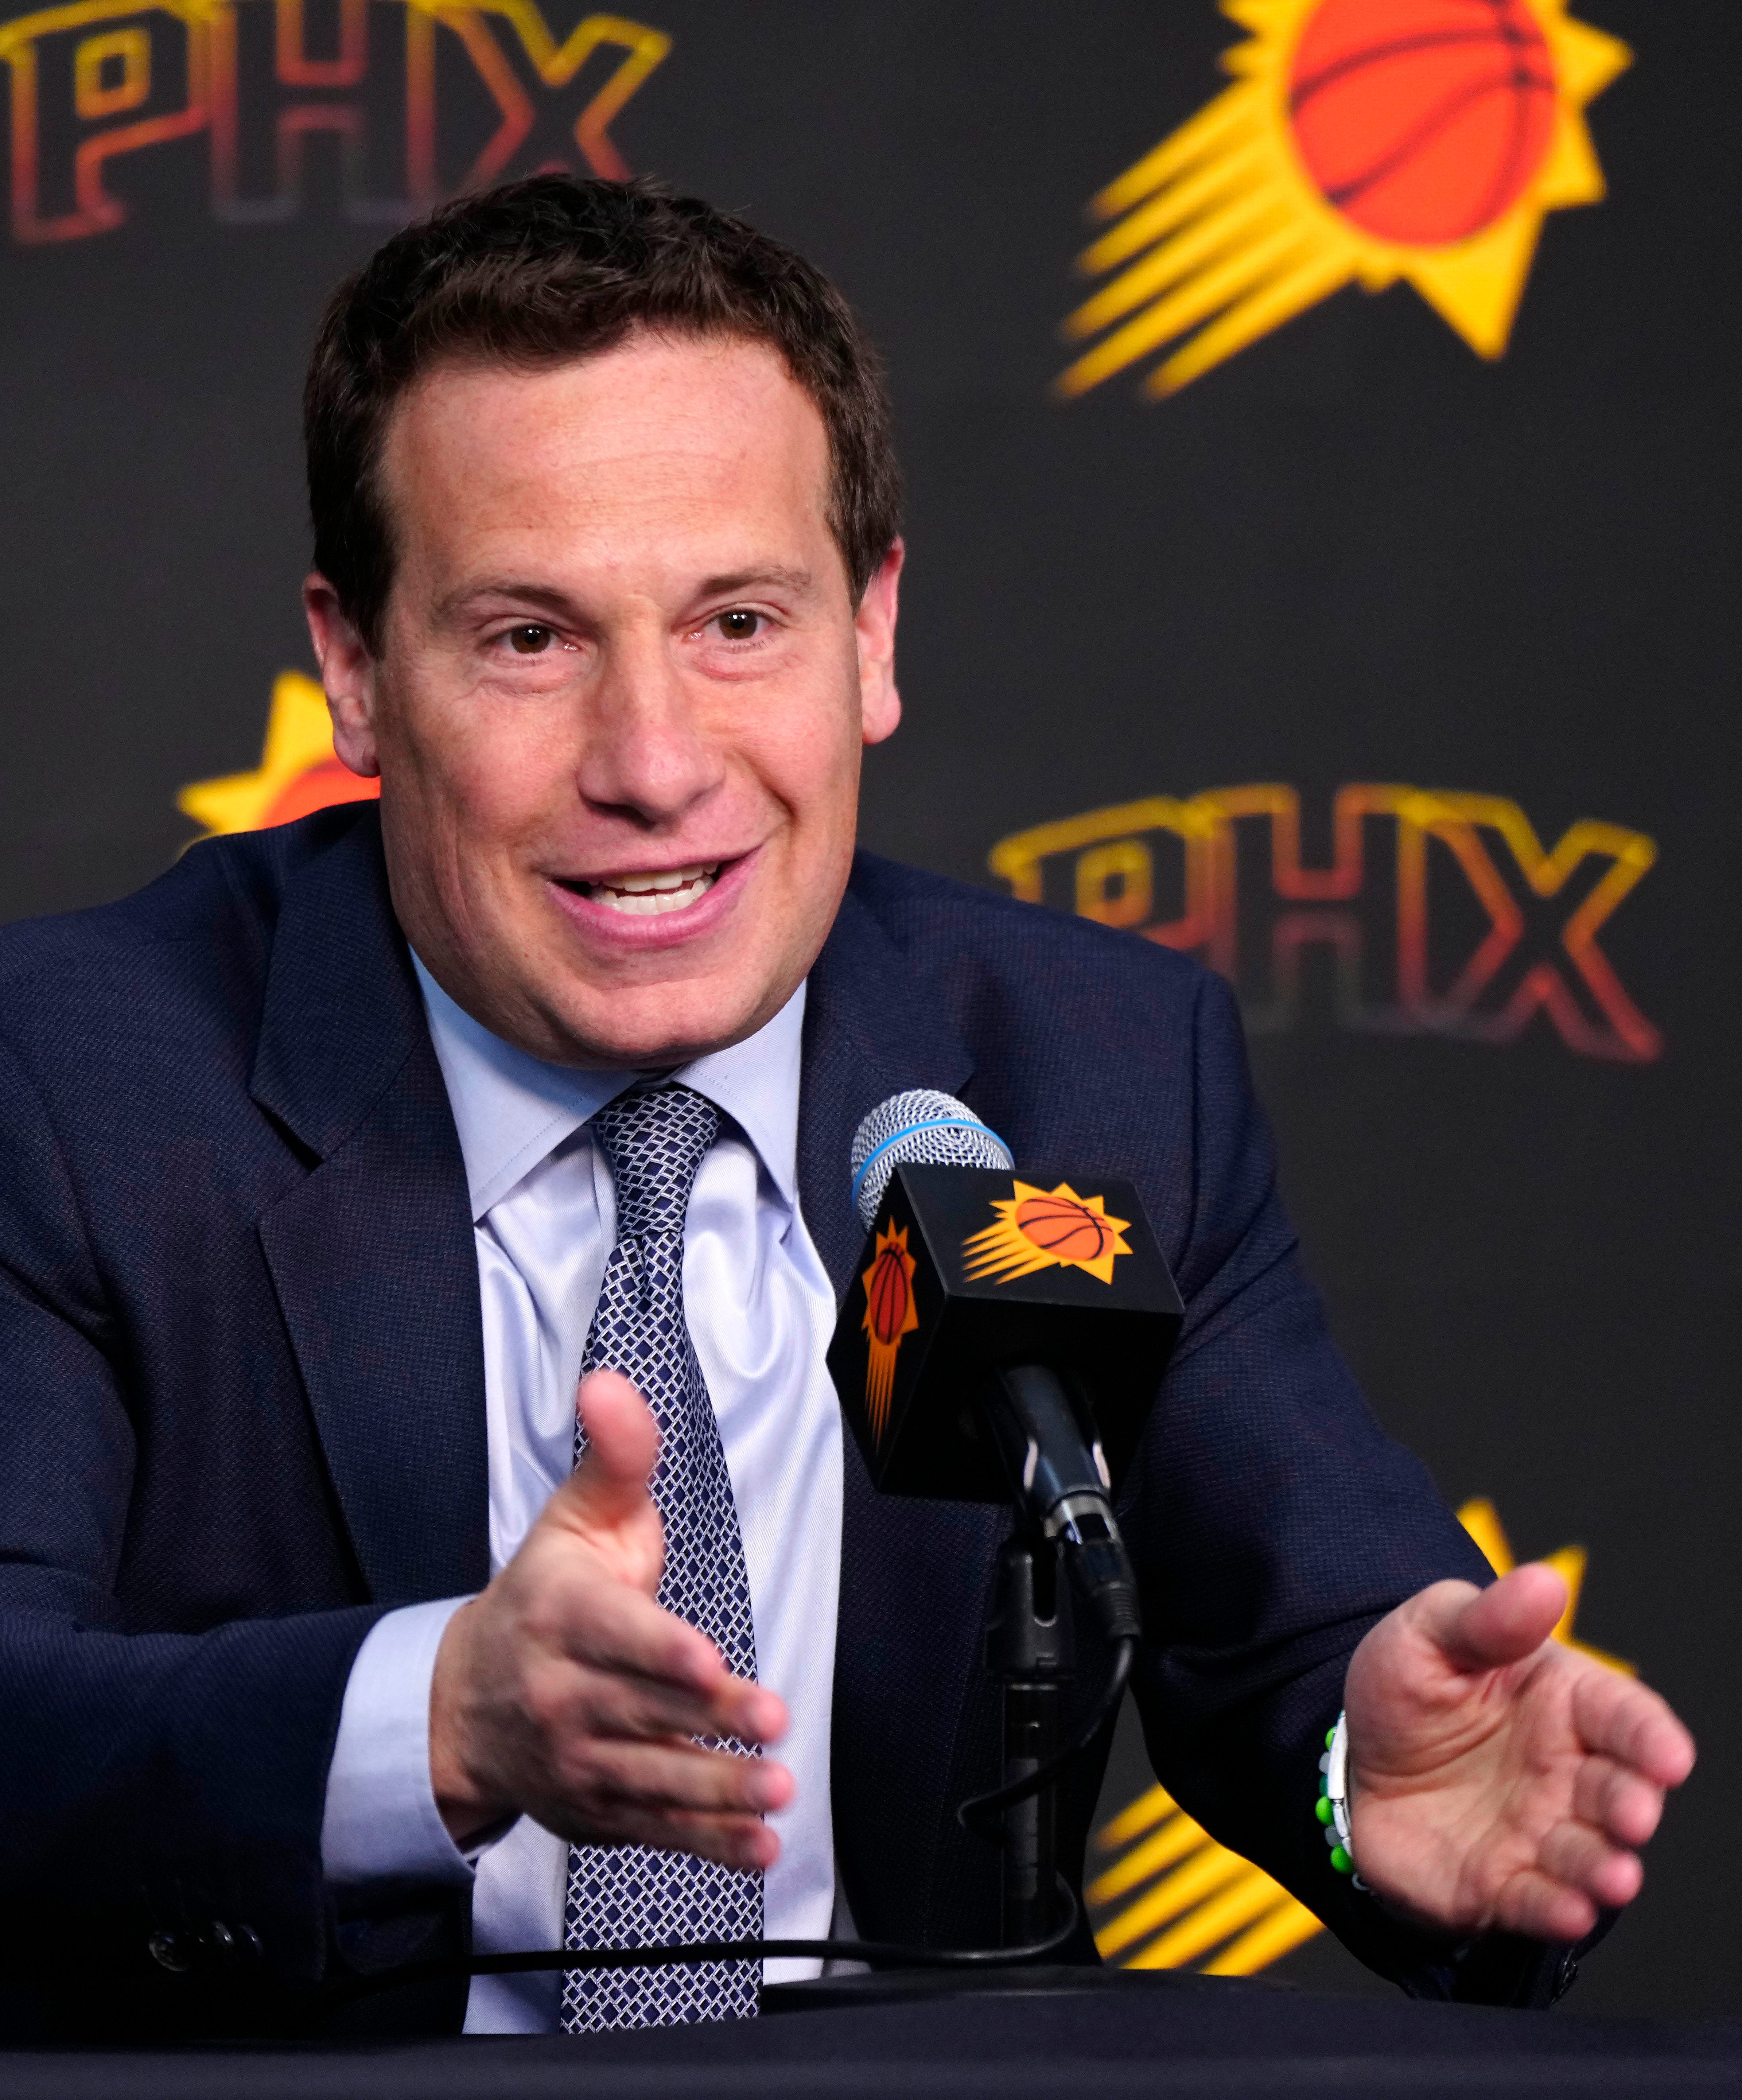 Suns owner Mat Ishbia's mortgage company agrees to partnership with NBA, WNBA